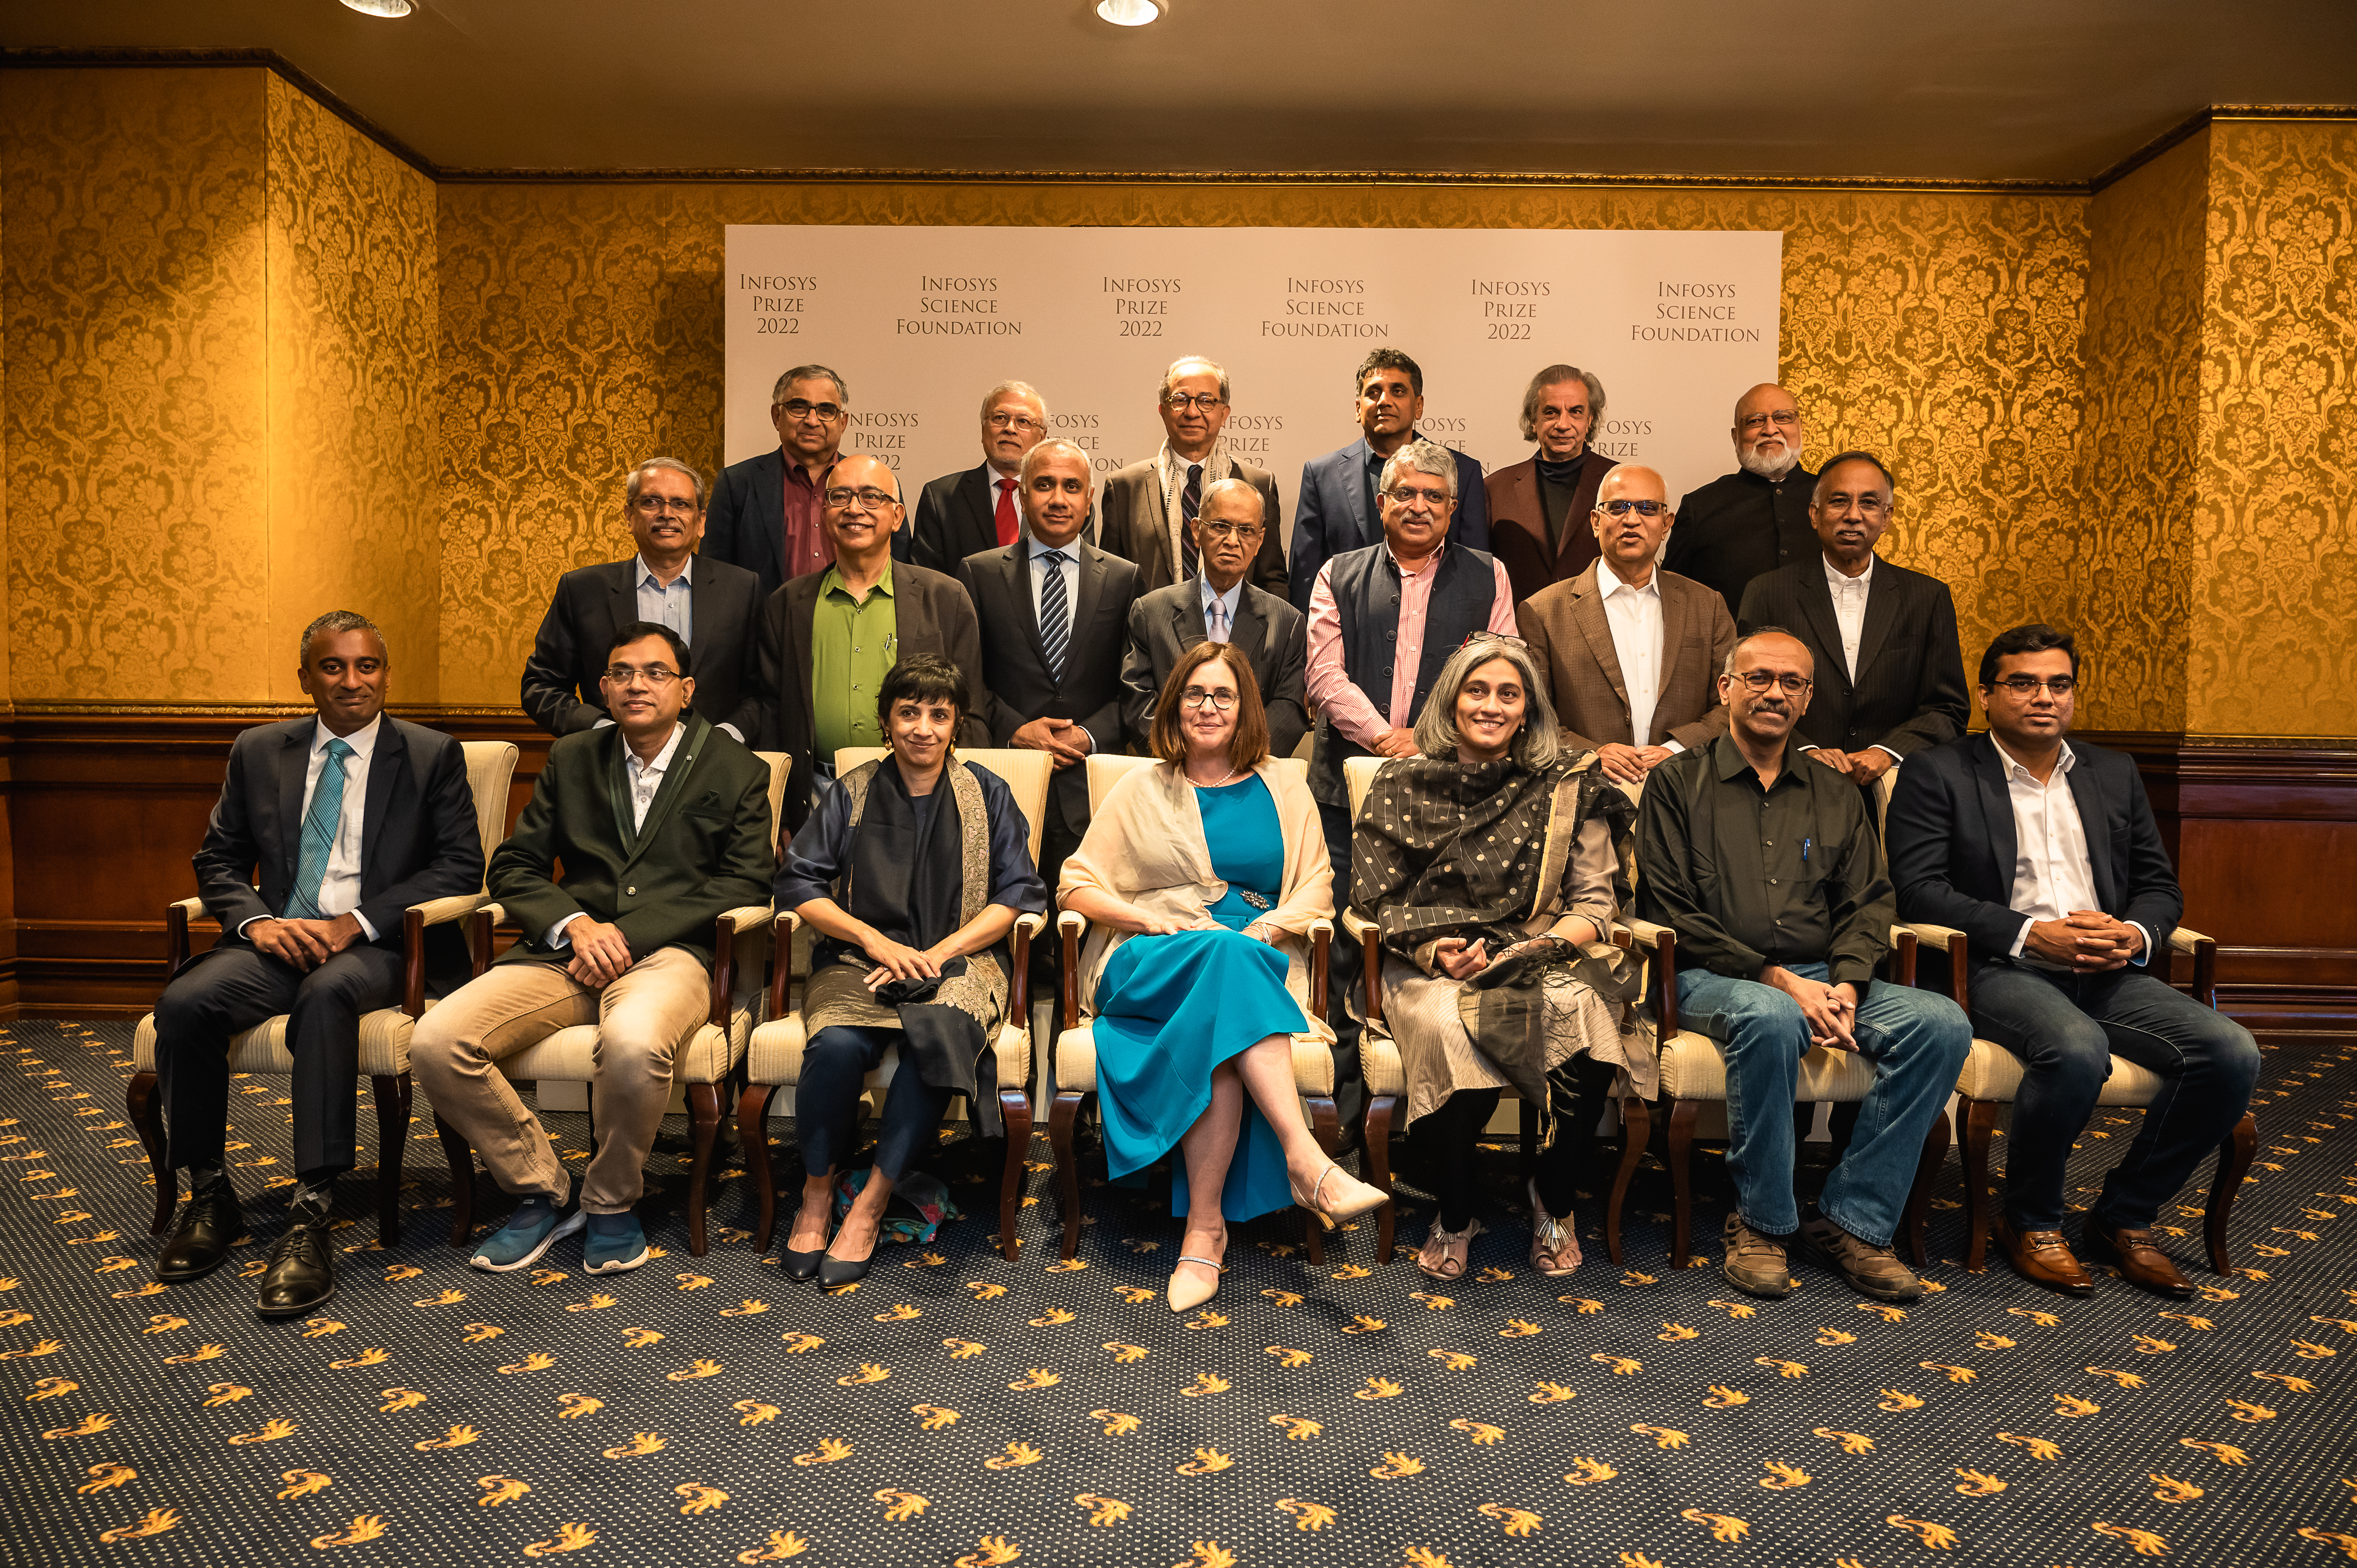 The Board of Trustees of the Infosys Science Foundation with the 2022 Infosys Prize laureates, and the Jury Chairs of all the six prize categories